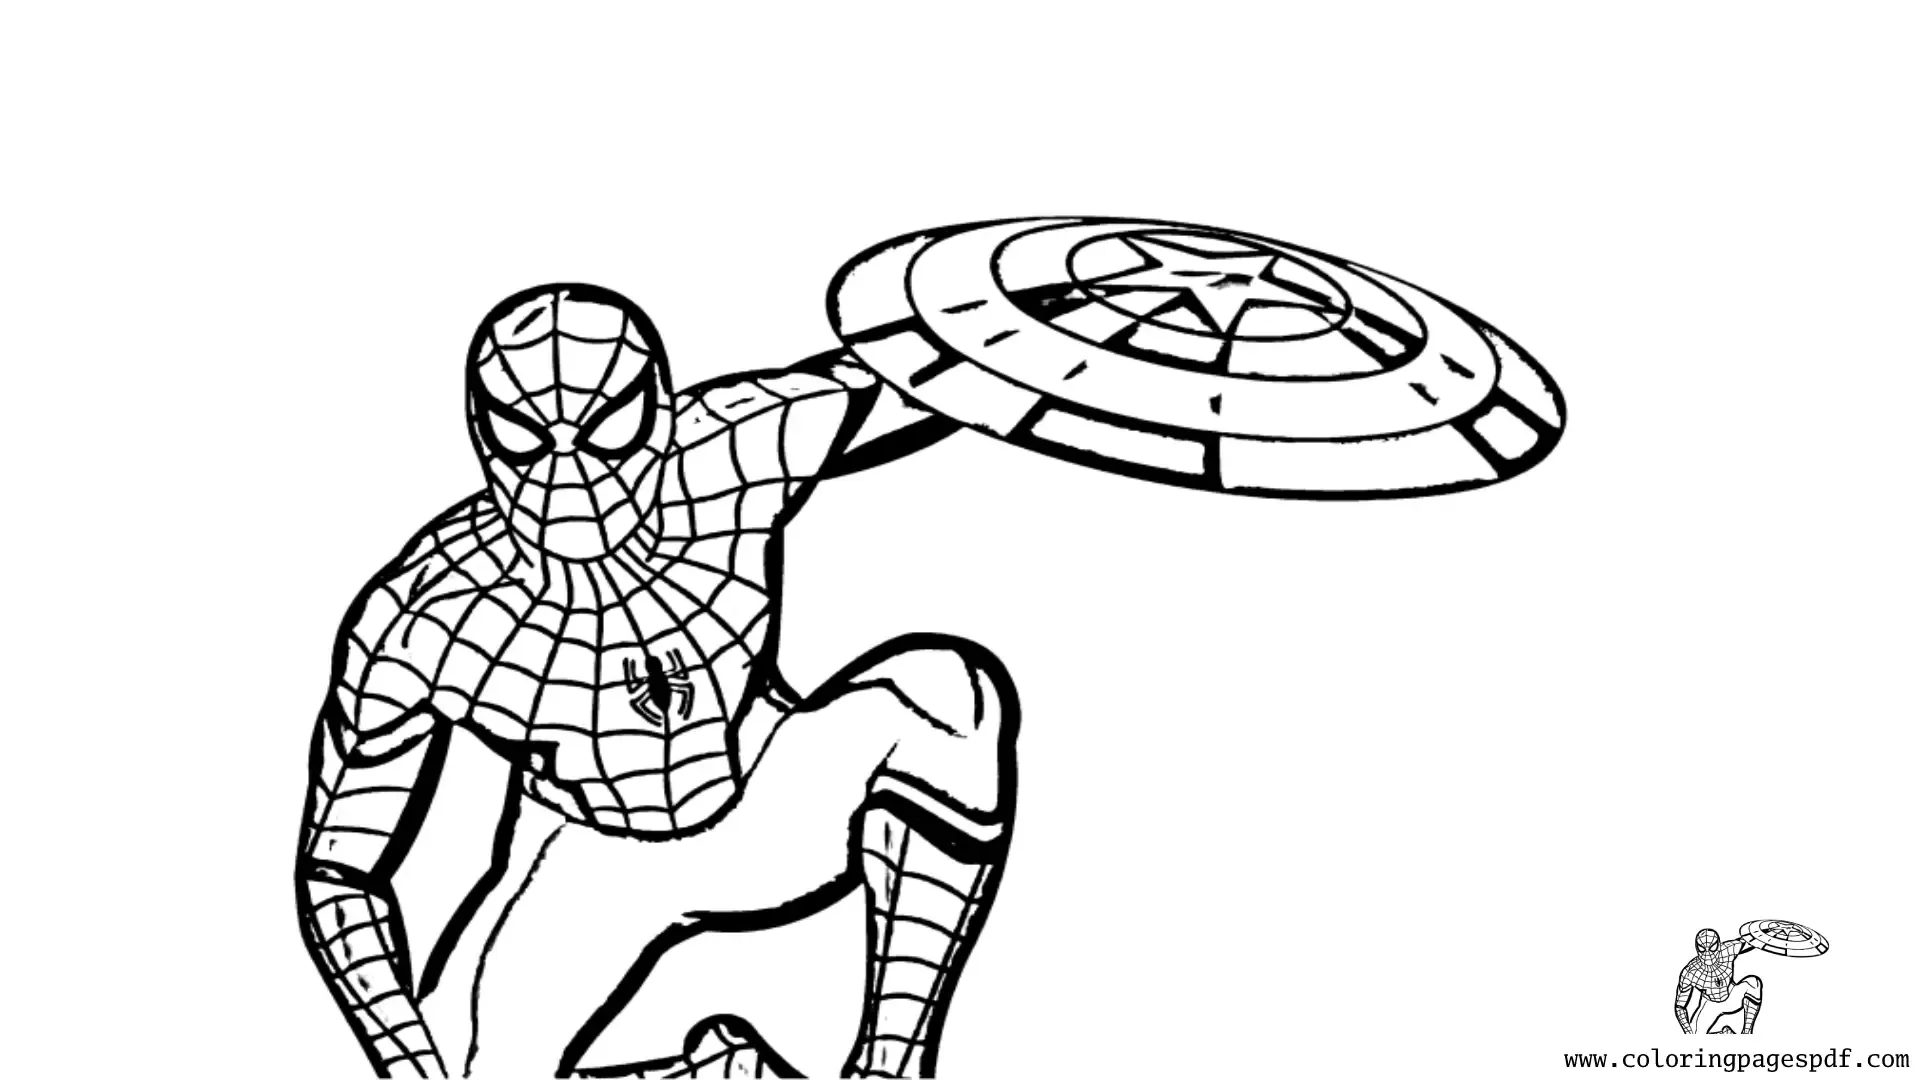 Coloring Page Of Spiderman With Captain America's Shield